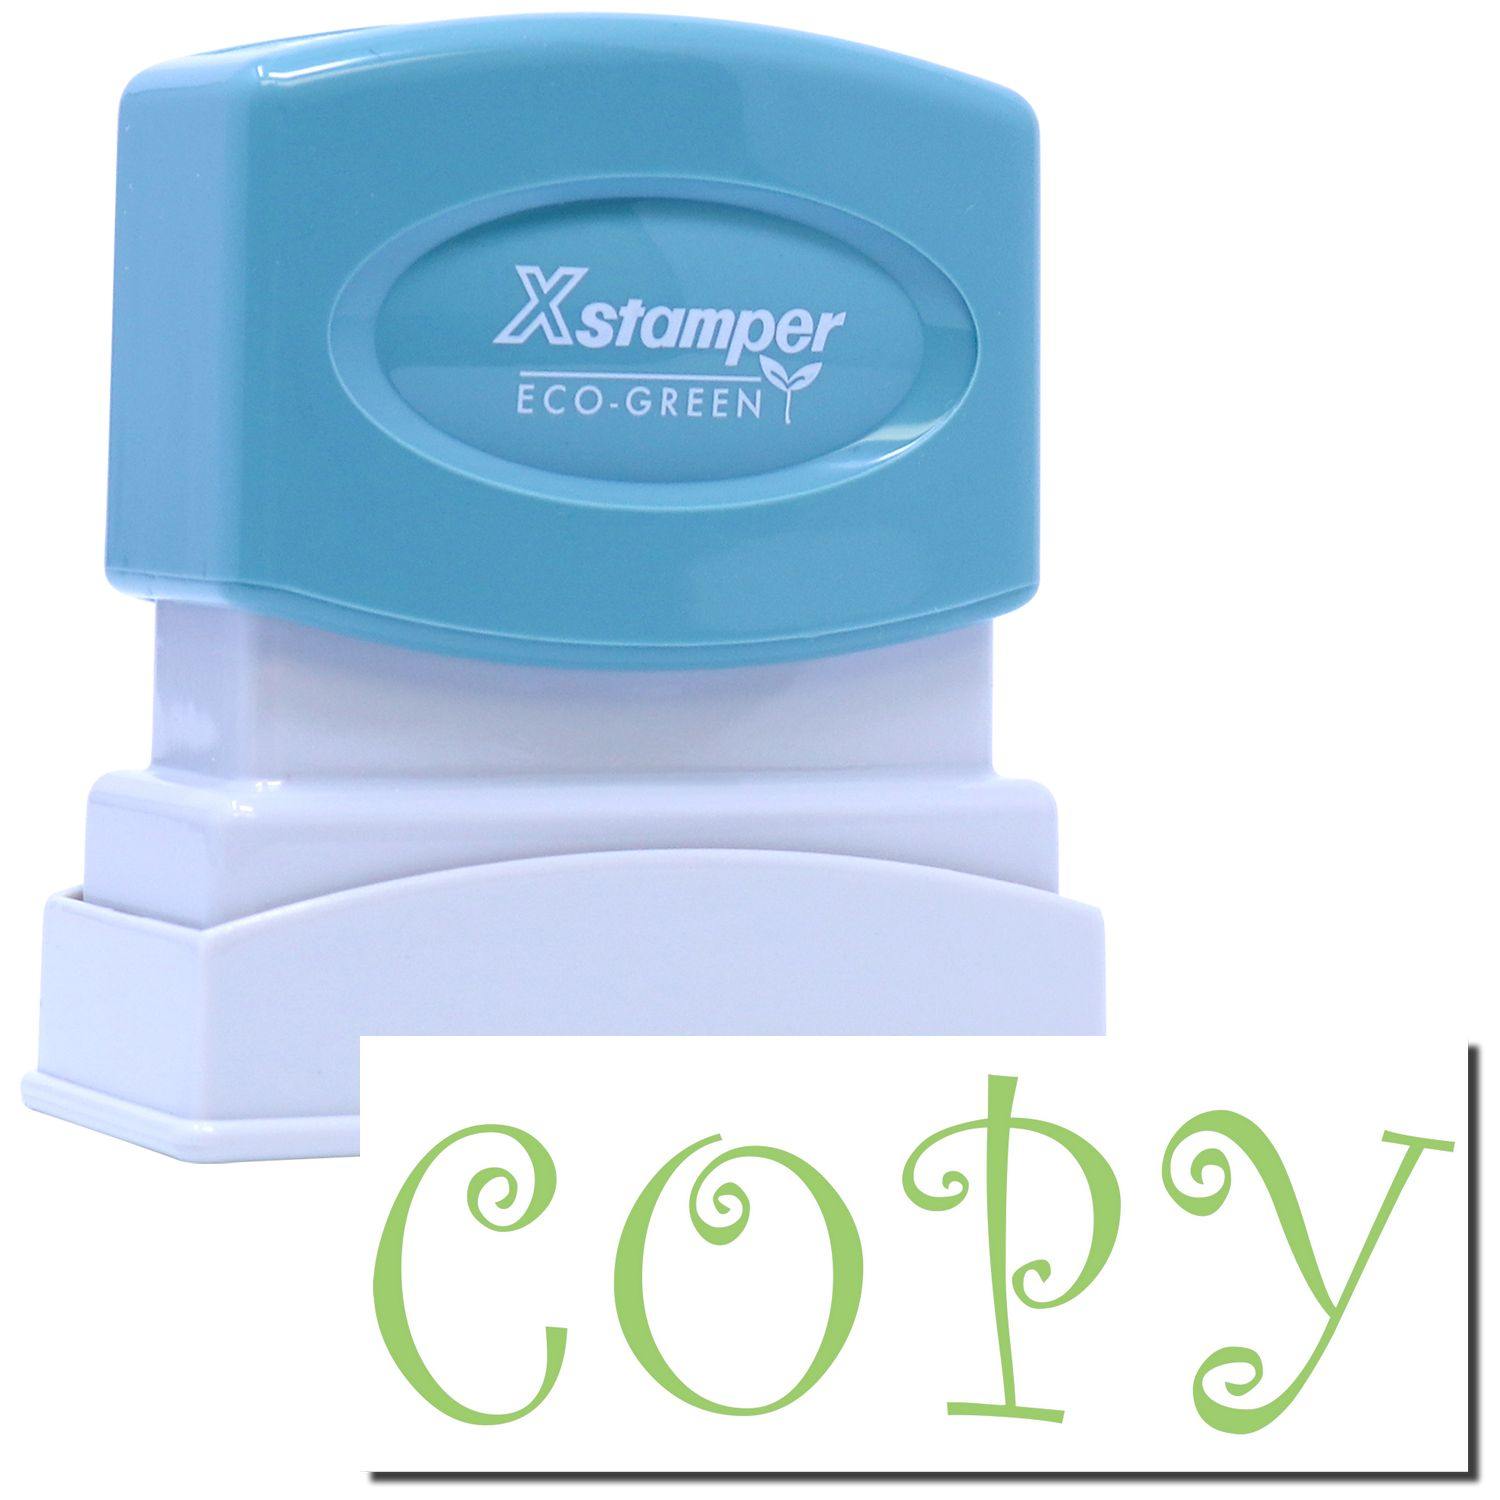 An xstamper stamp with a stamped image showing how the text "COPY" in a green color is displayed after stamping.